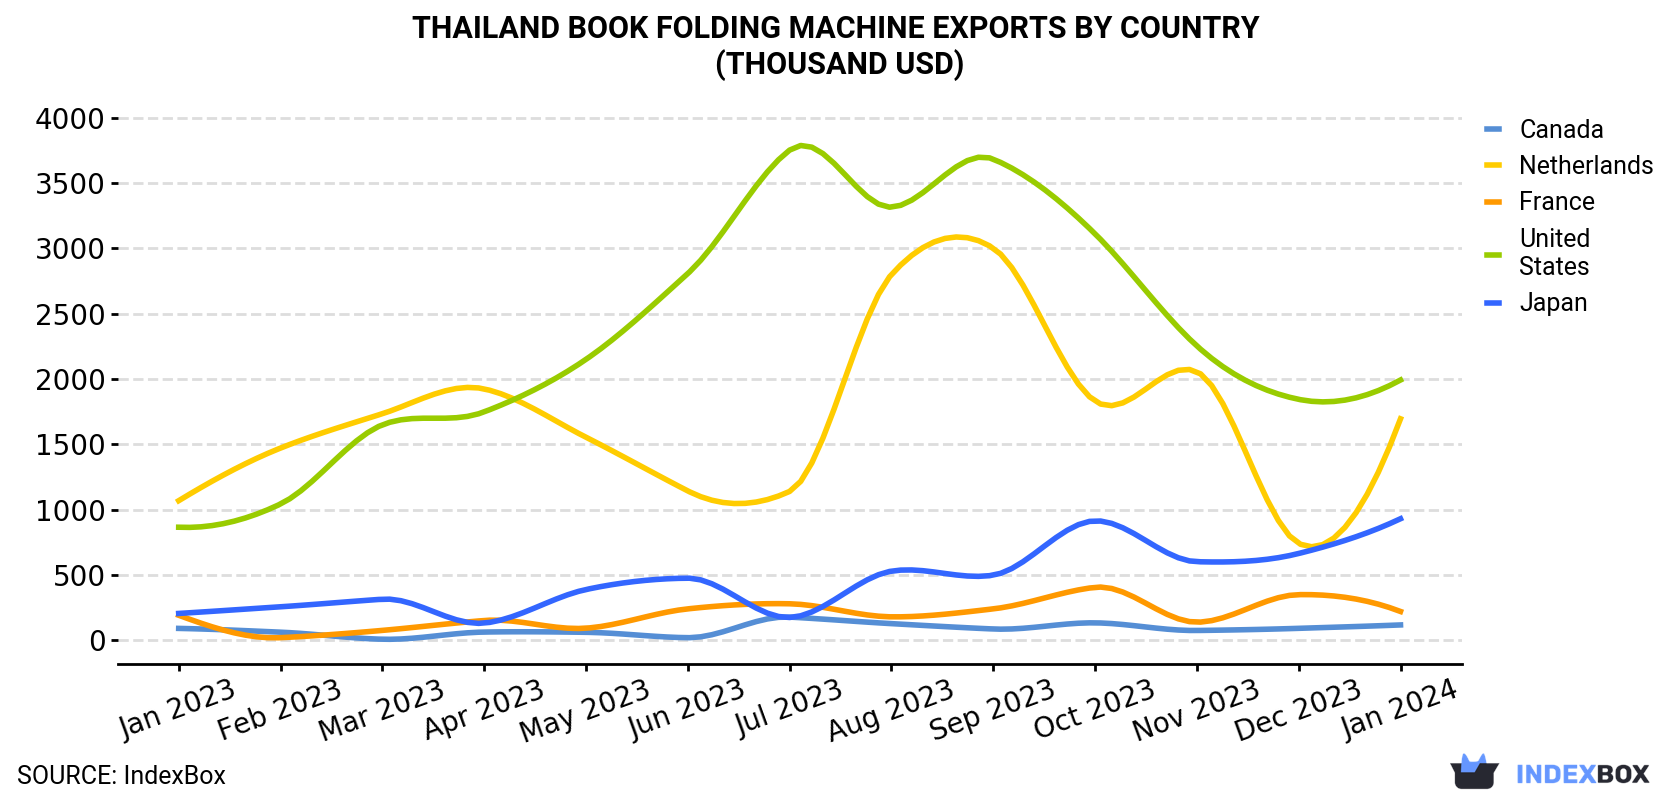 Thailand Book Folding Machine Exports By Country (Thousand USD)